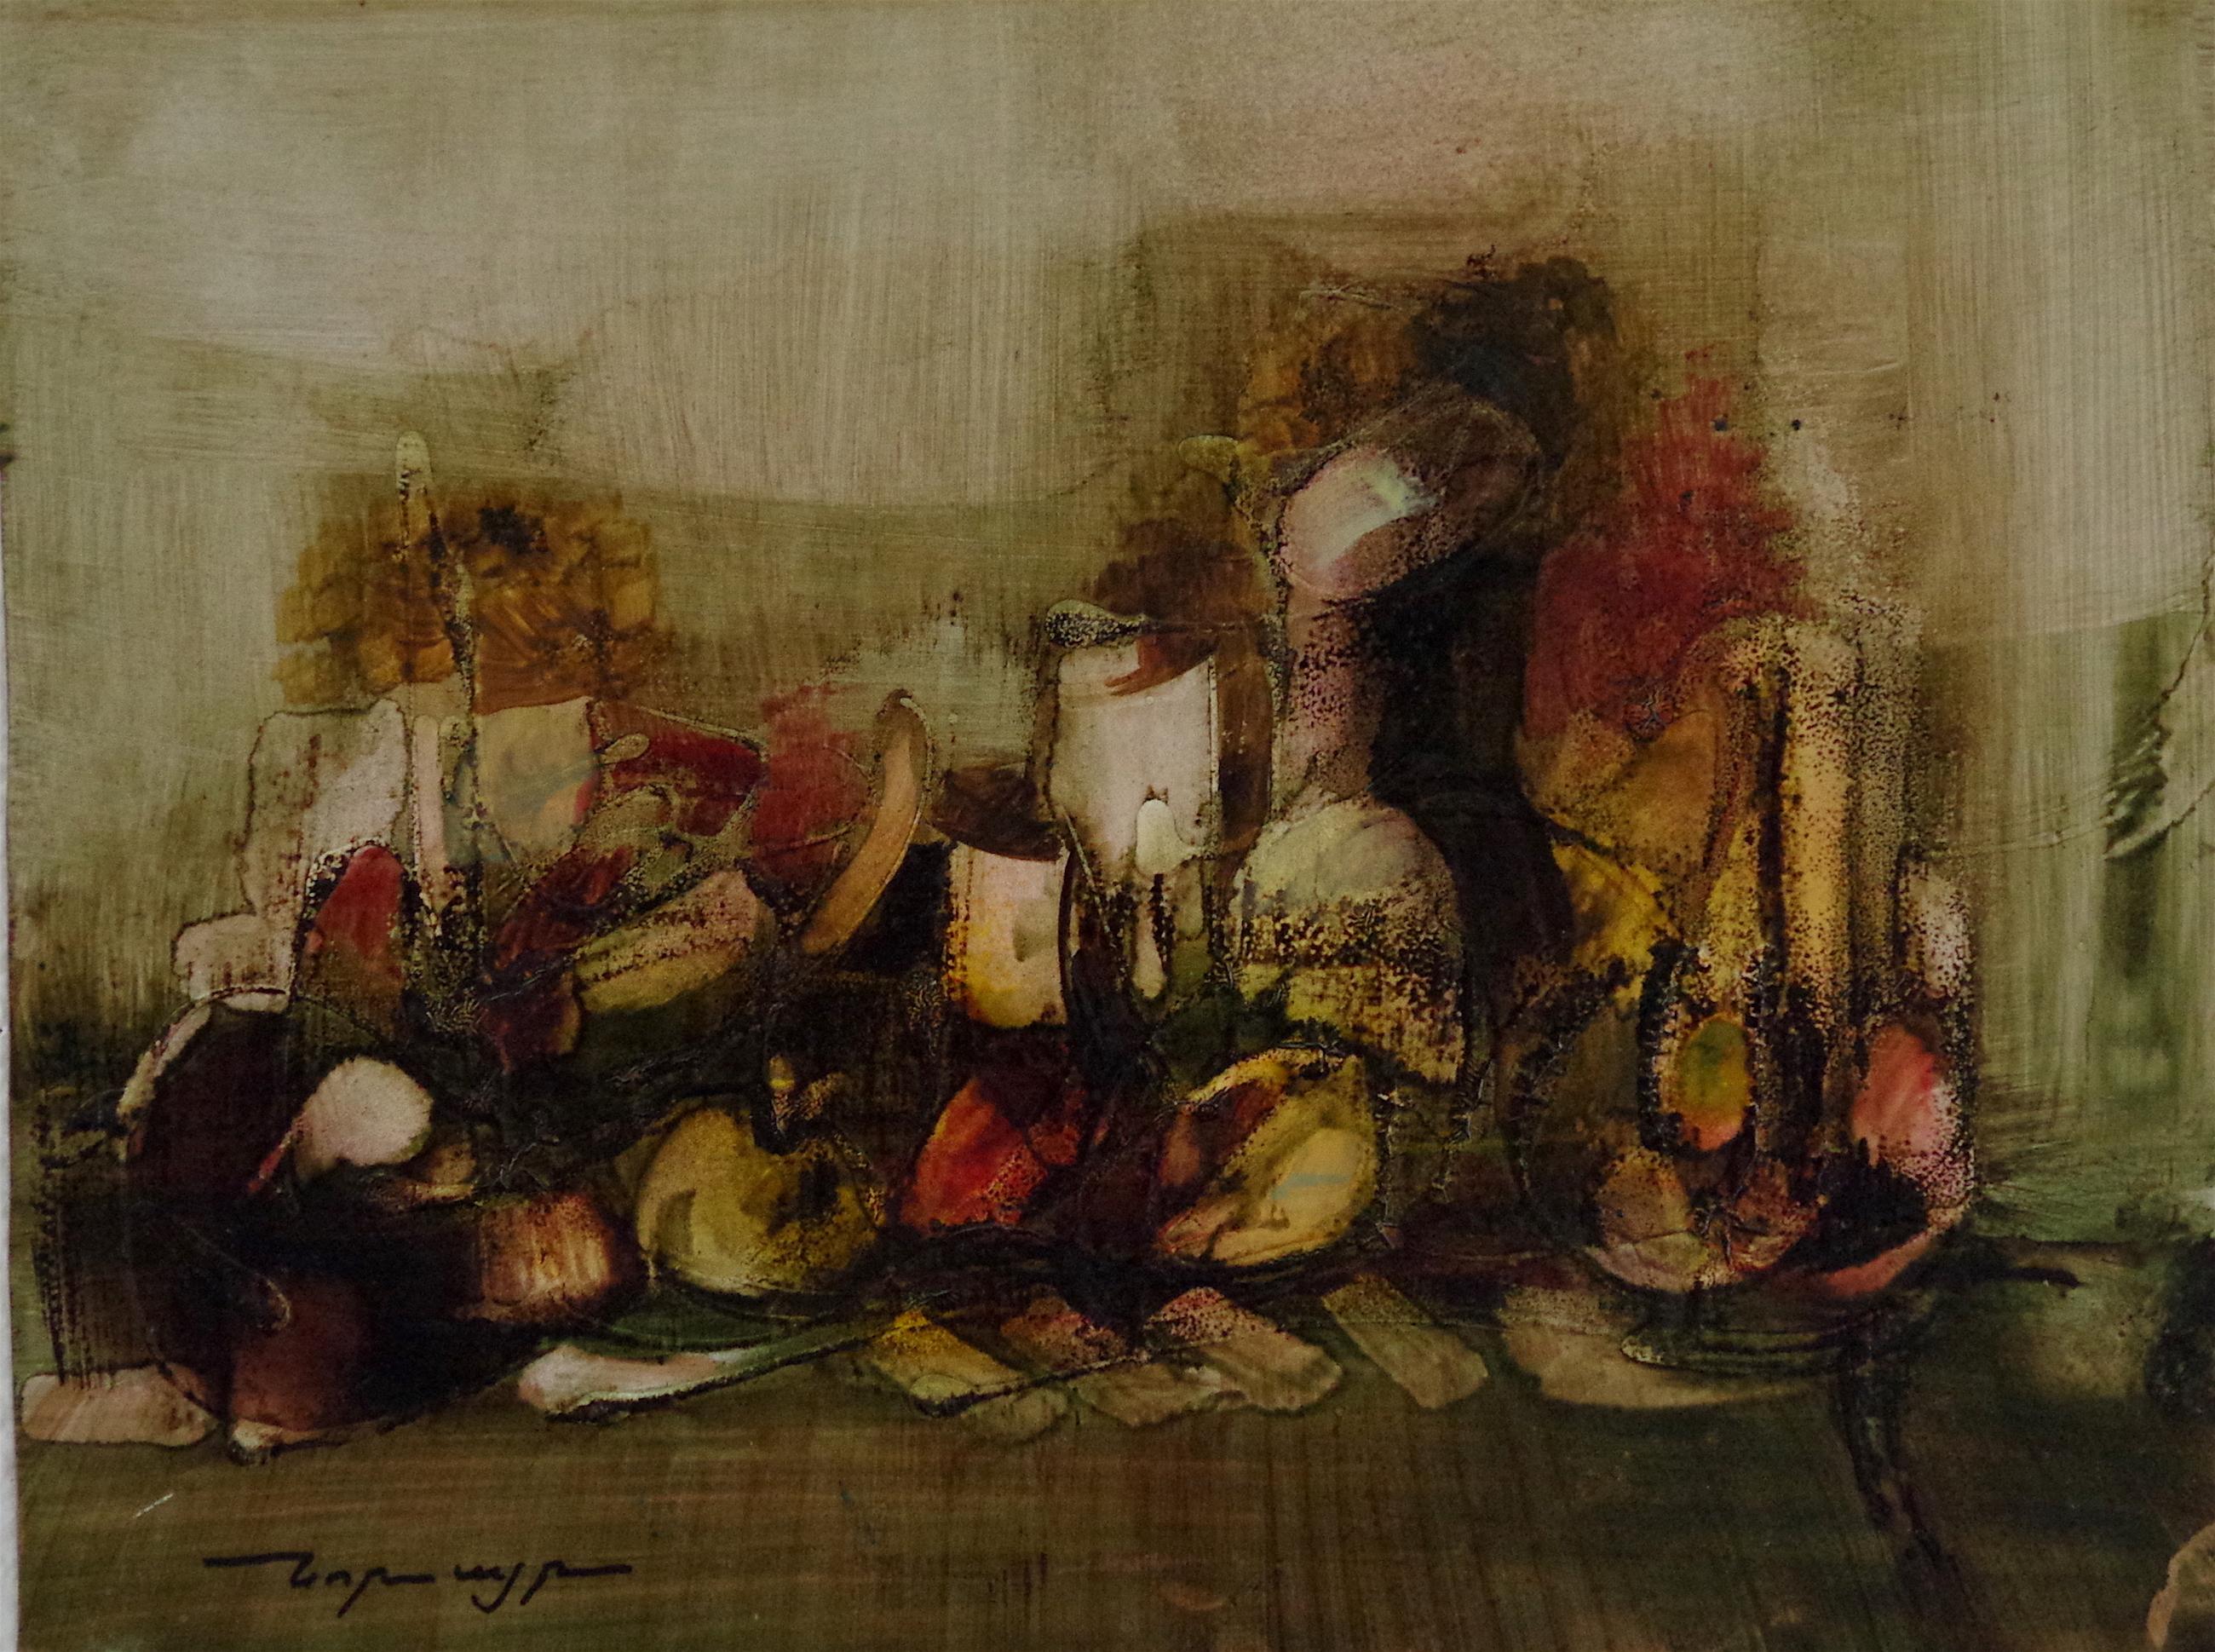 Norayr Gevorgyan Abstract Painting - Kitchen art, Original Oil Painting, One of a Kind